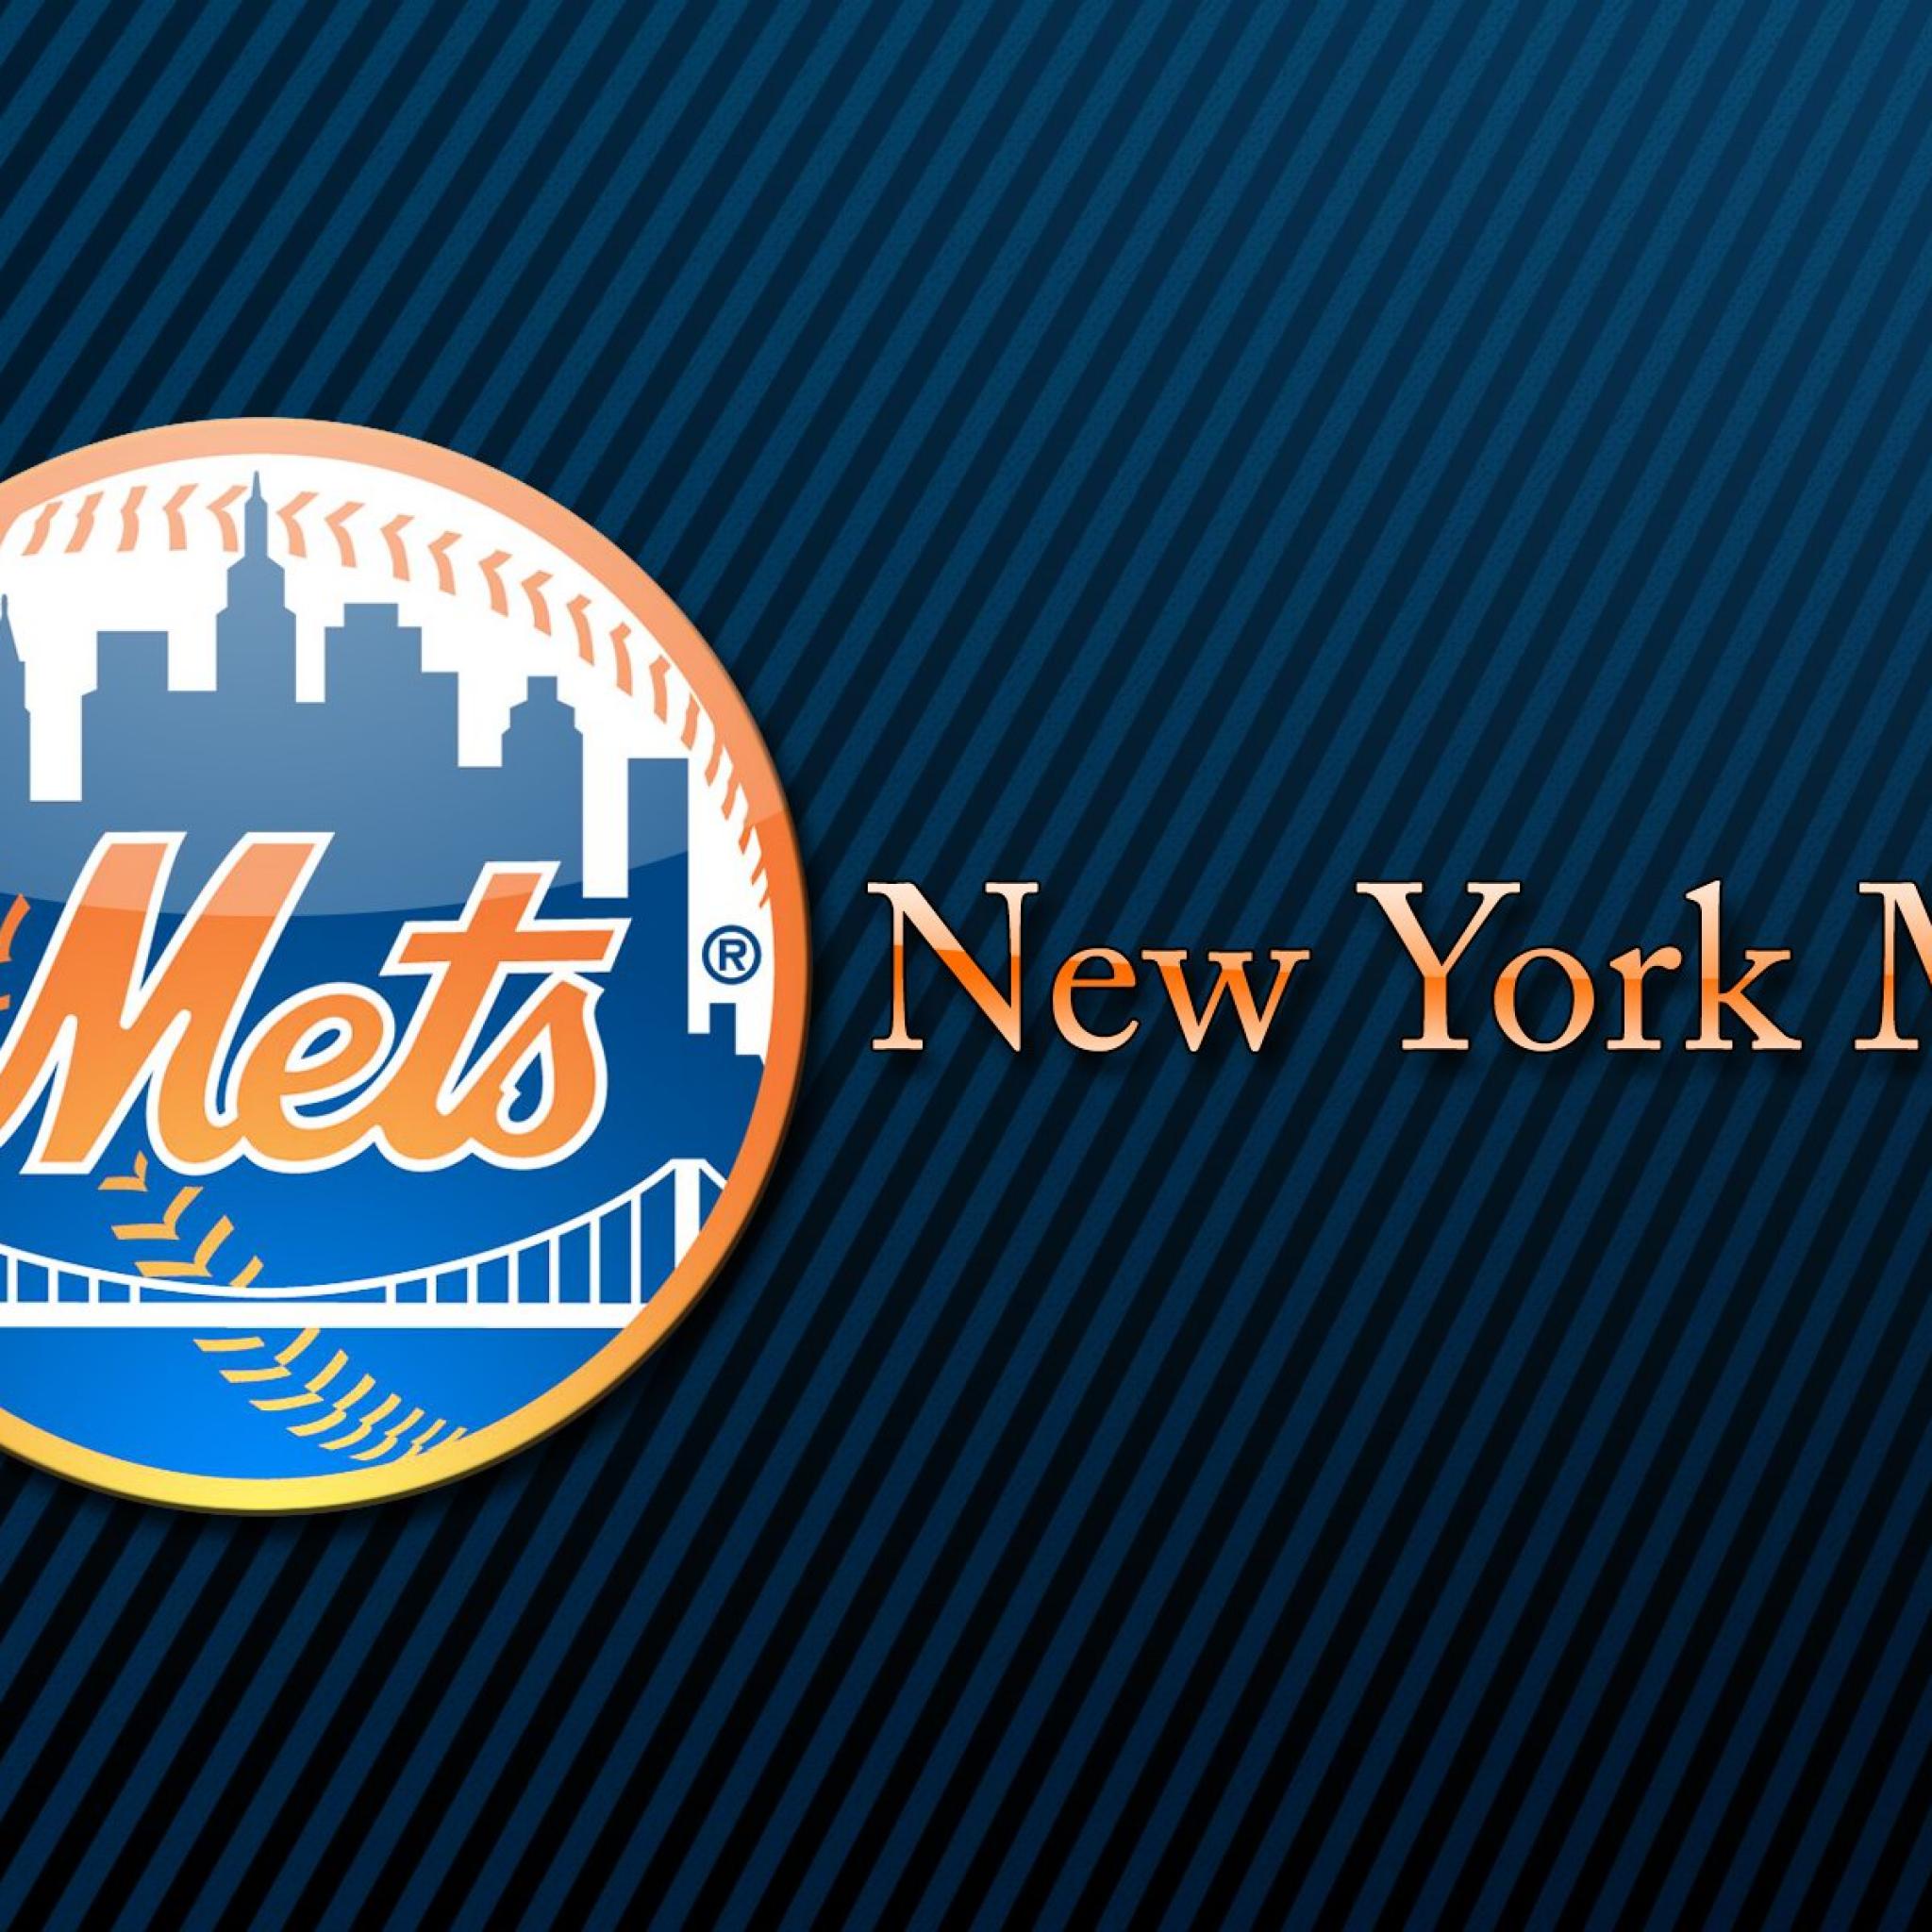 Baseball Wallpapers New York Mets Images Crazy Gallery